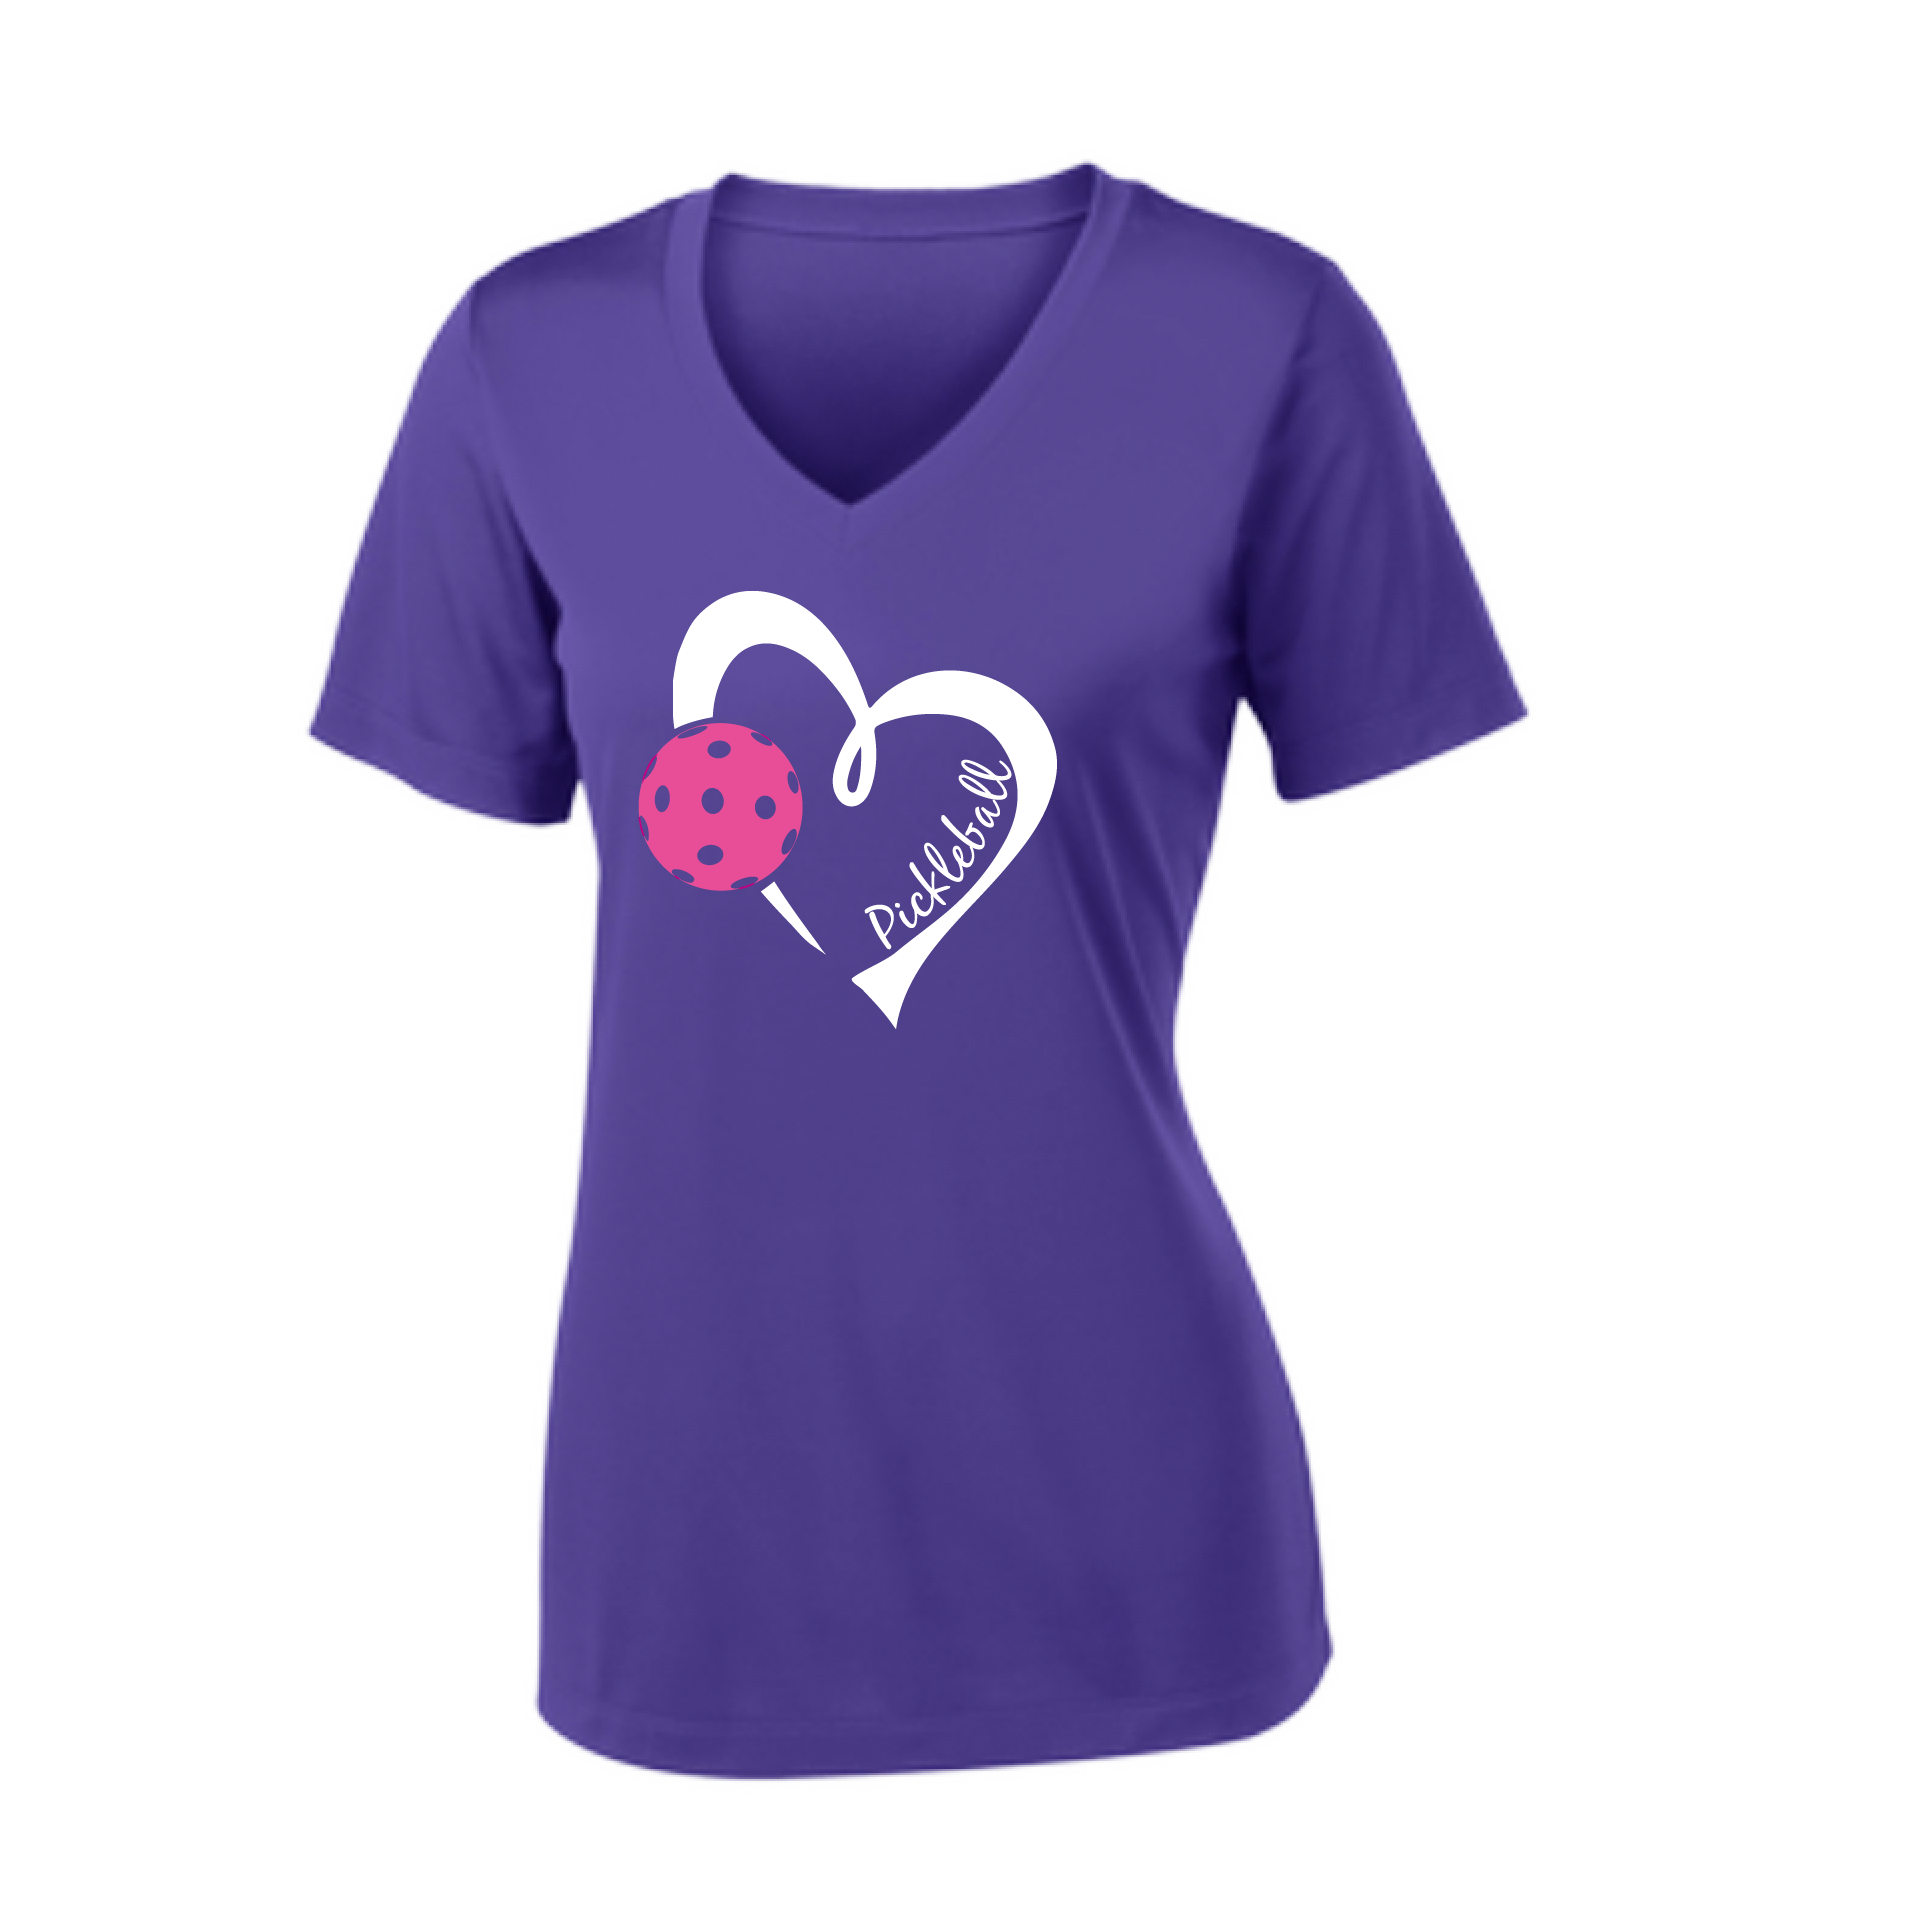 Pickleball Design: Heart with Pickleball  Women's Style: Short Sleeve V-Neck  Turn up the volume in this Women's shirt with its perfect mix of softness and attitude. Material is ultra-comfortable with moisture wicking properties and tri-blend softness. PosiCharge technology locks in color. Highly breathable and lightweight.